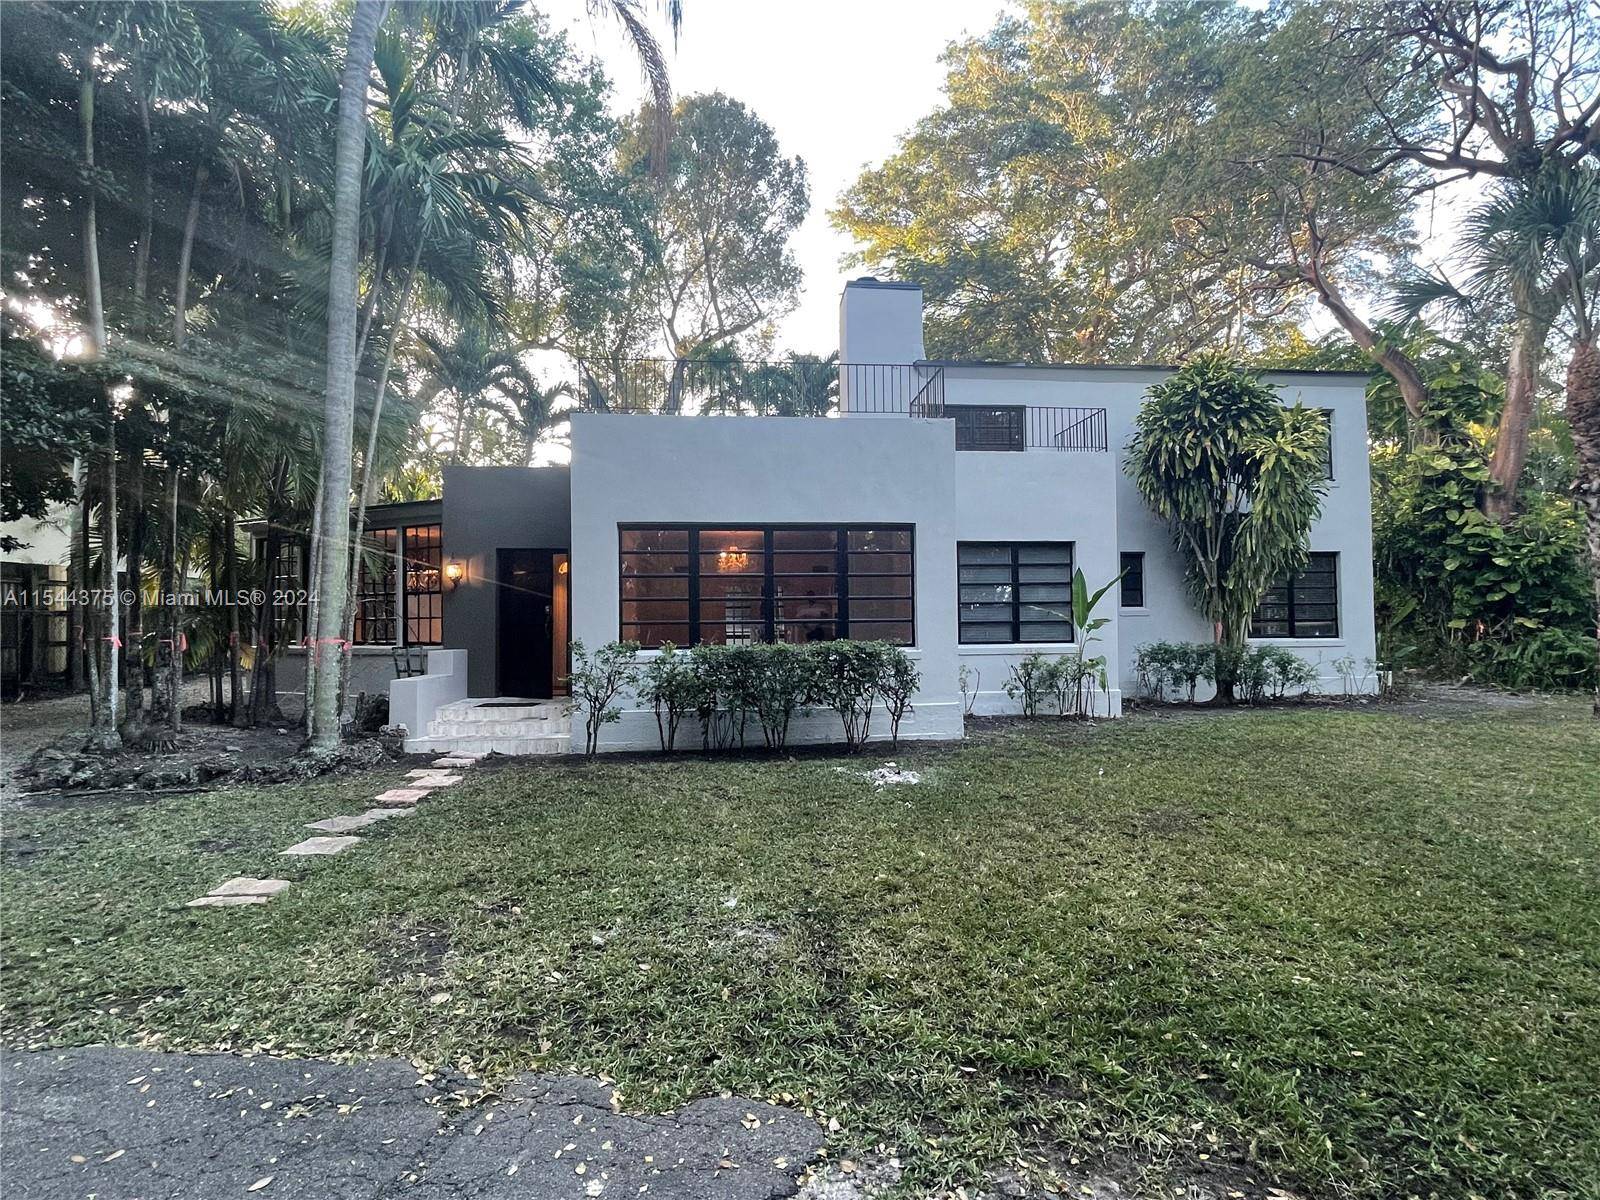 This single family home in the South West Coconut Grove neighborhood, This property has 4 bedrooms, 2 bathrooms, approximately 2, 420 sqft and huge outside patio with a pool and ...